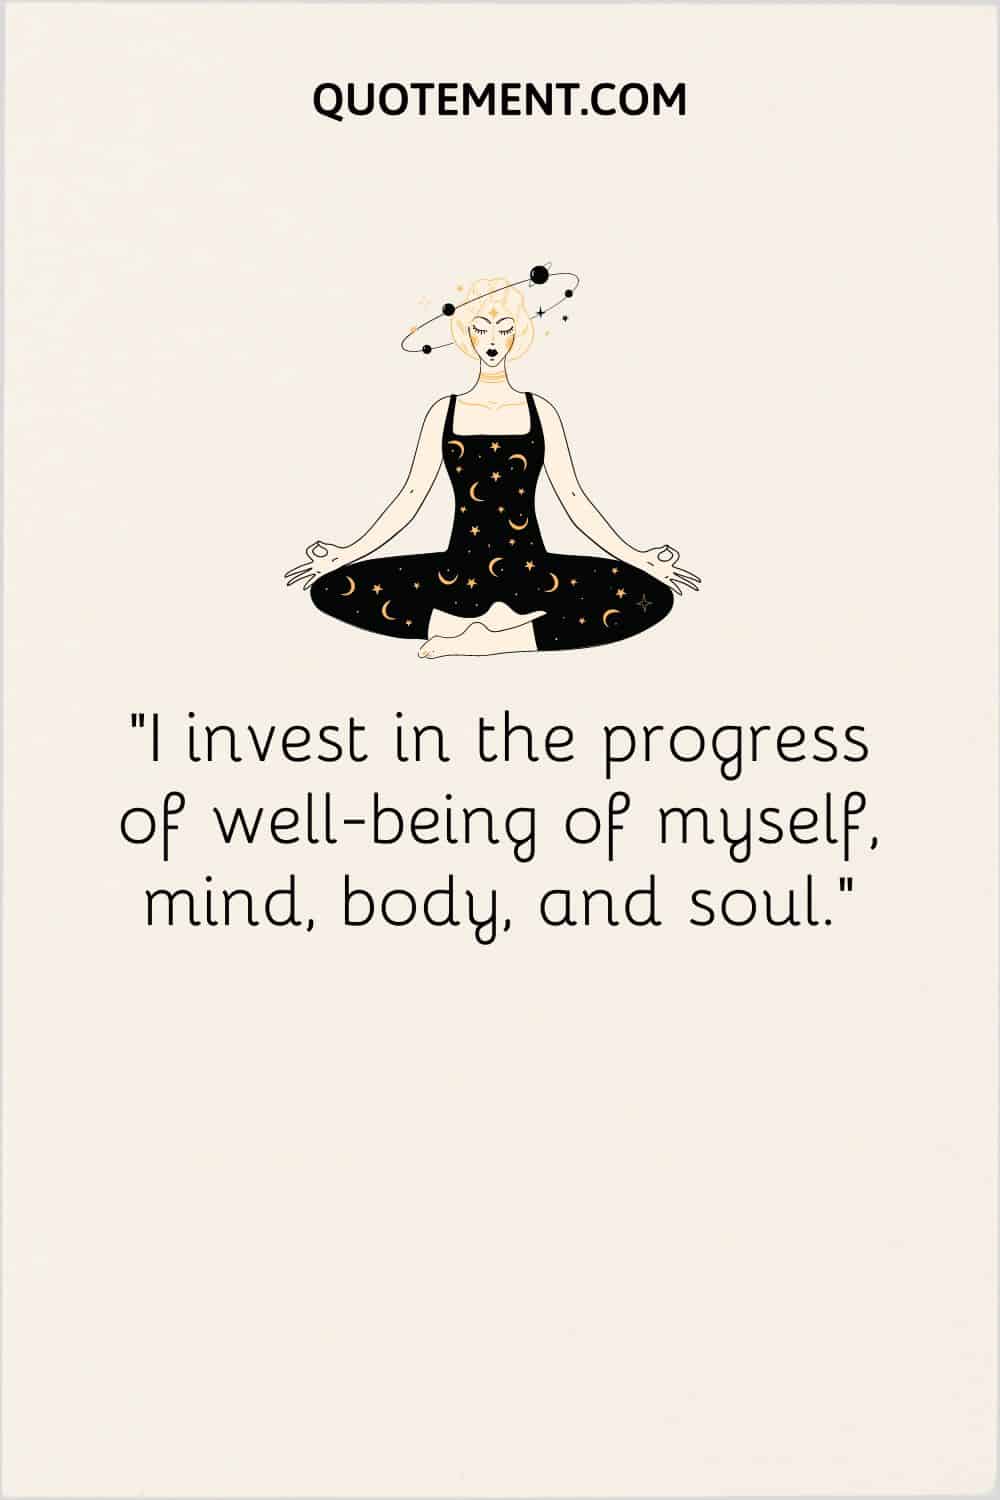 I invest in the progress of well-being of myself, mind, body, and soul.